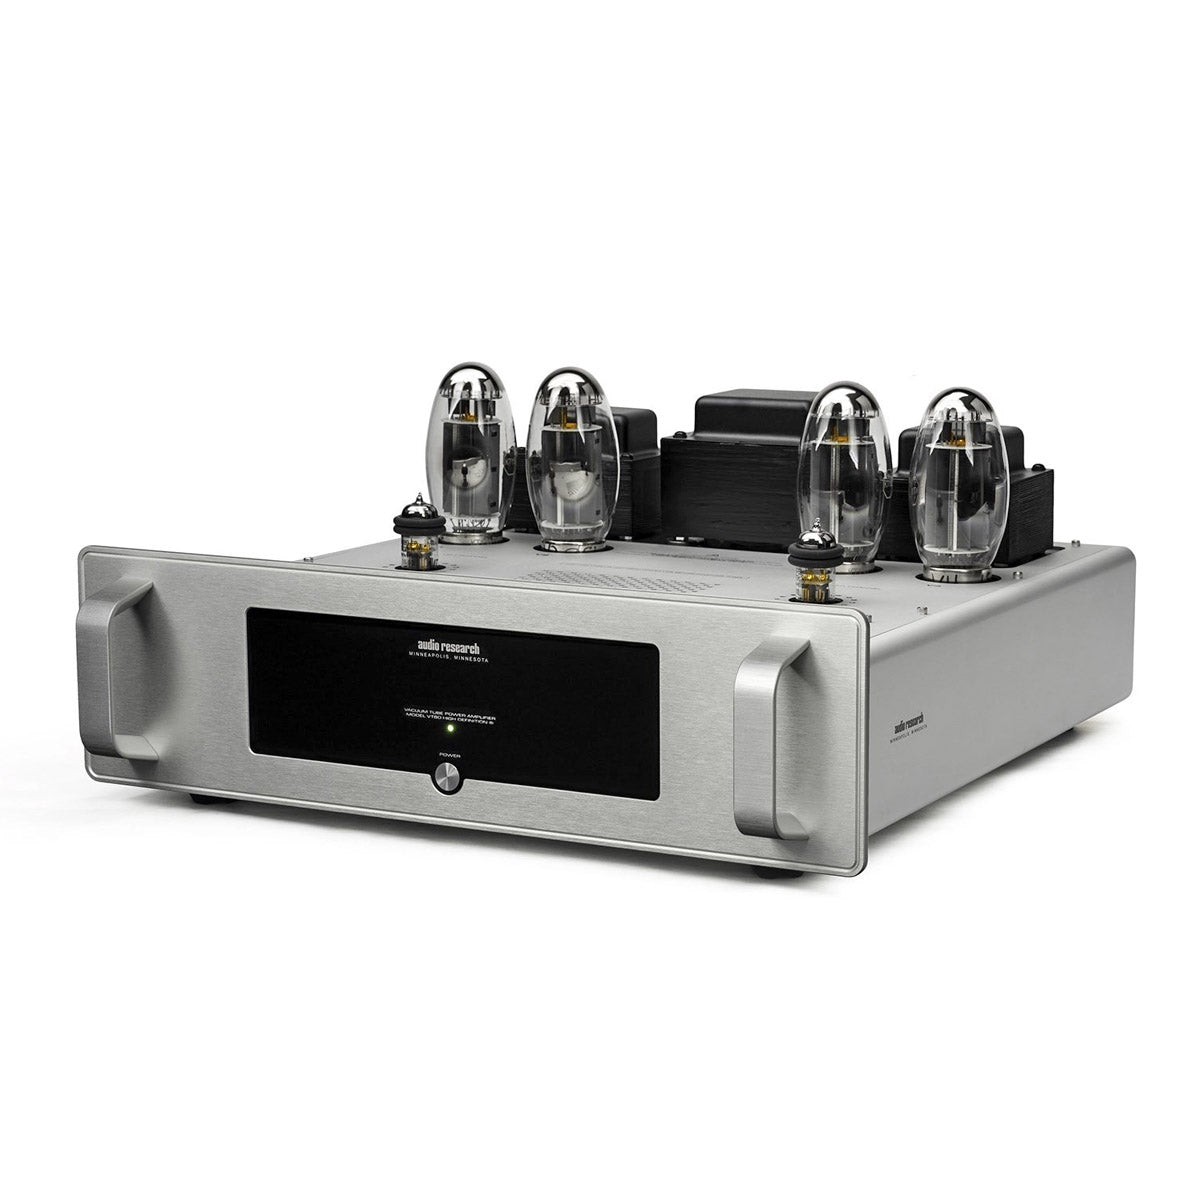 Audio Research VT80 SE stereo power amplifier